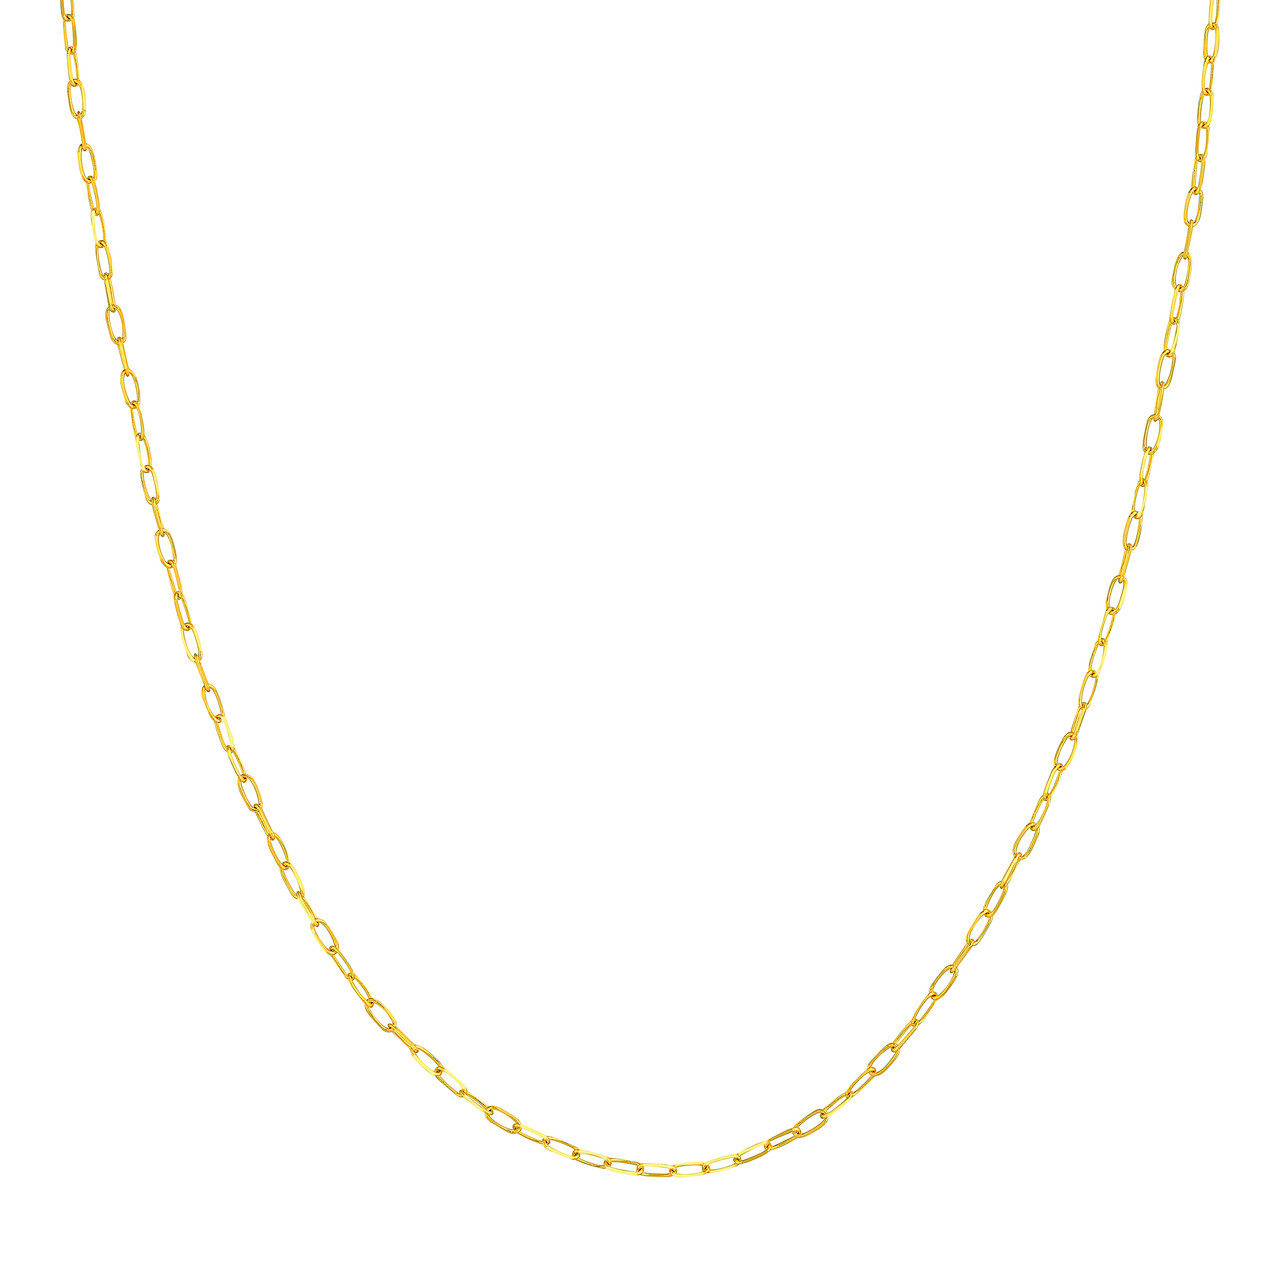 Yellow Gold Solid Petite1.7mm Paperclip Chain l 20 inches